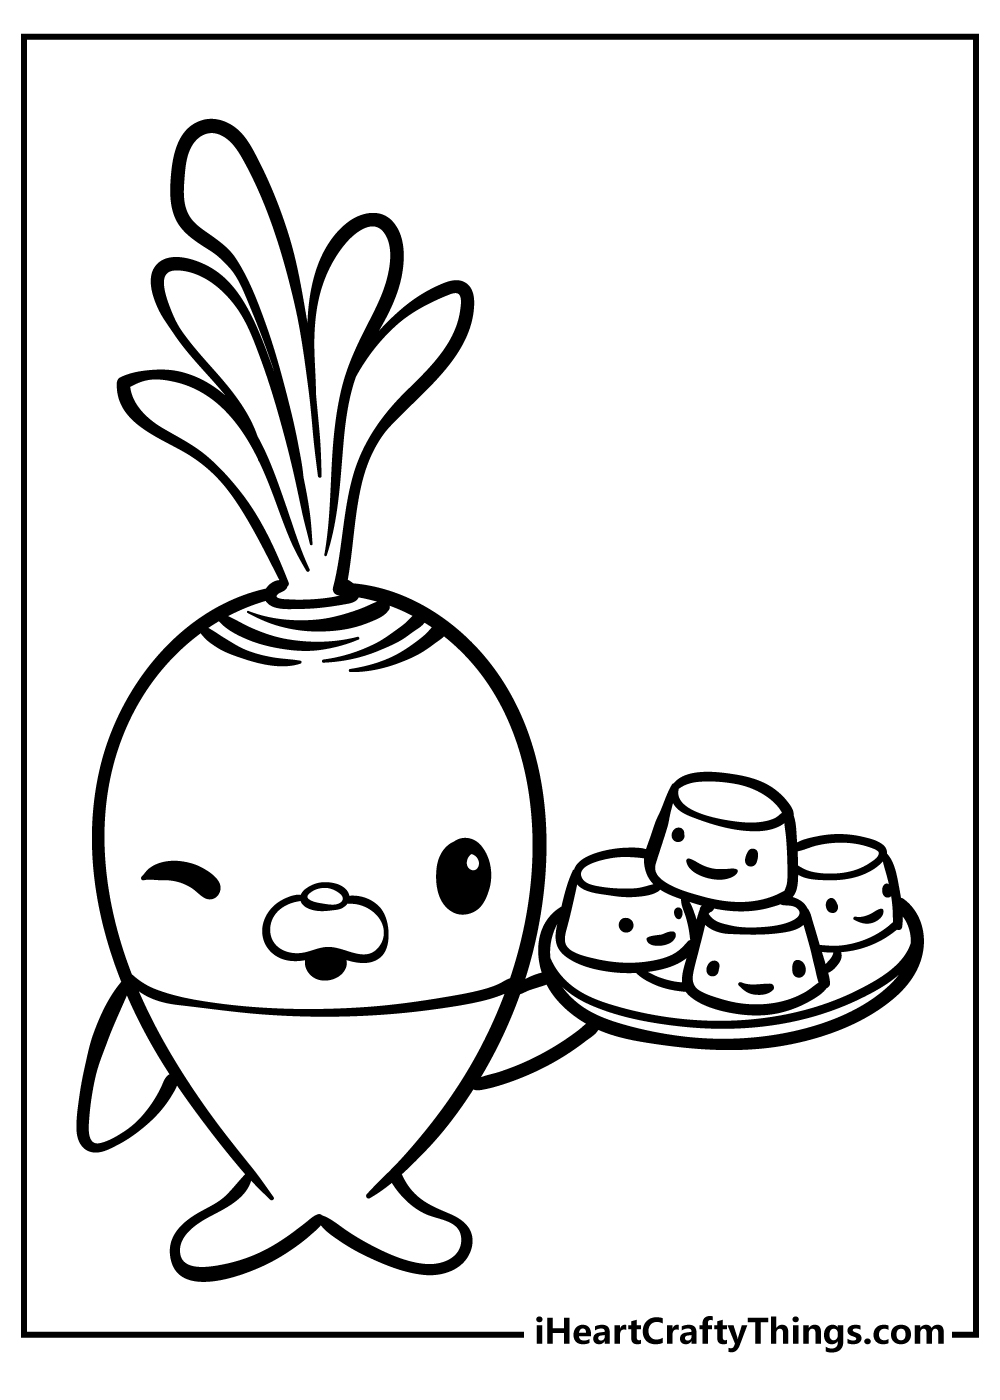 Octonauts coloring pages free printables